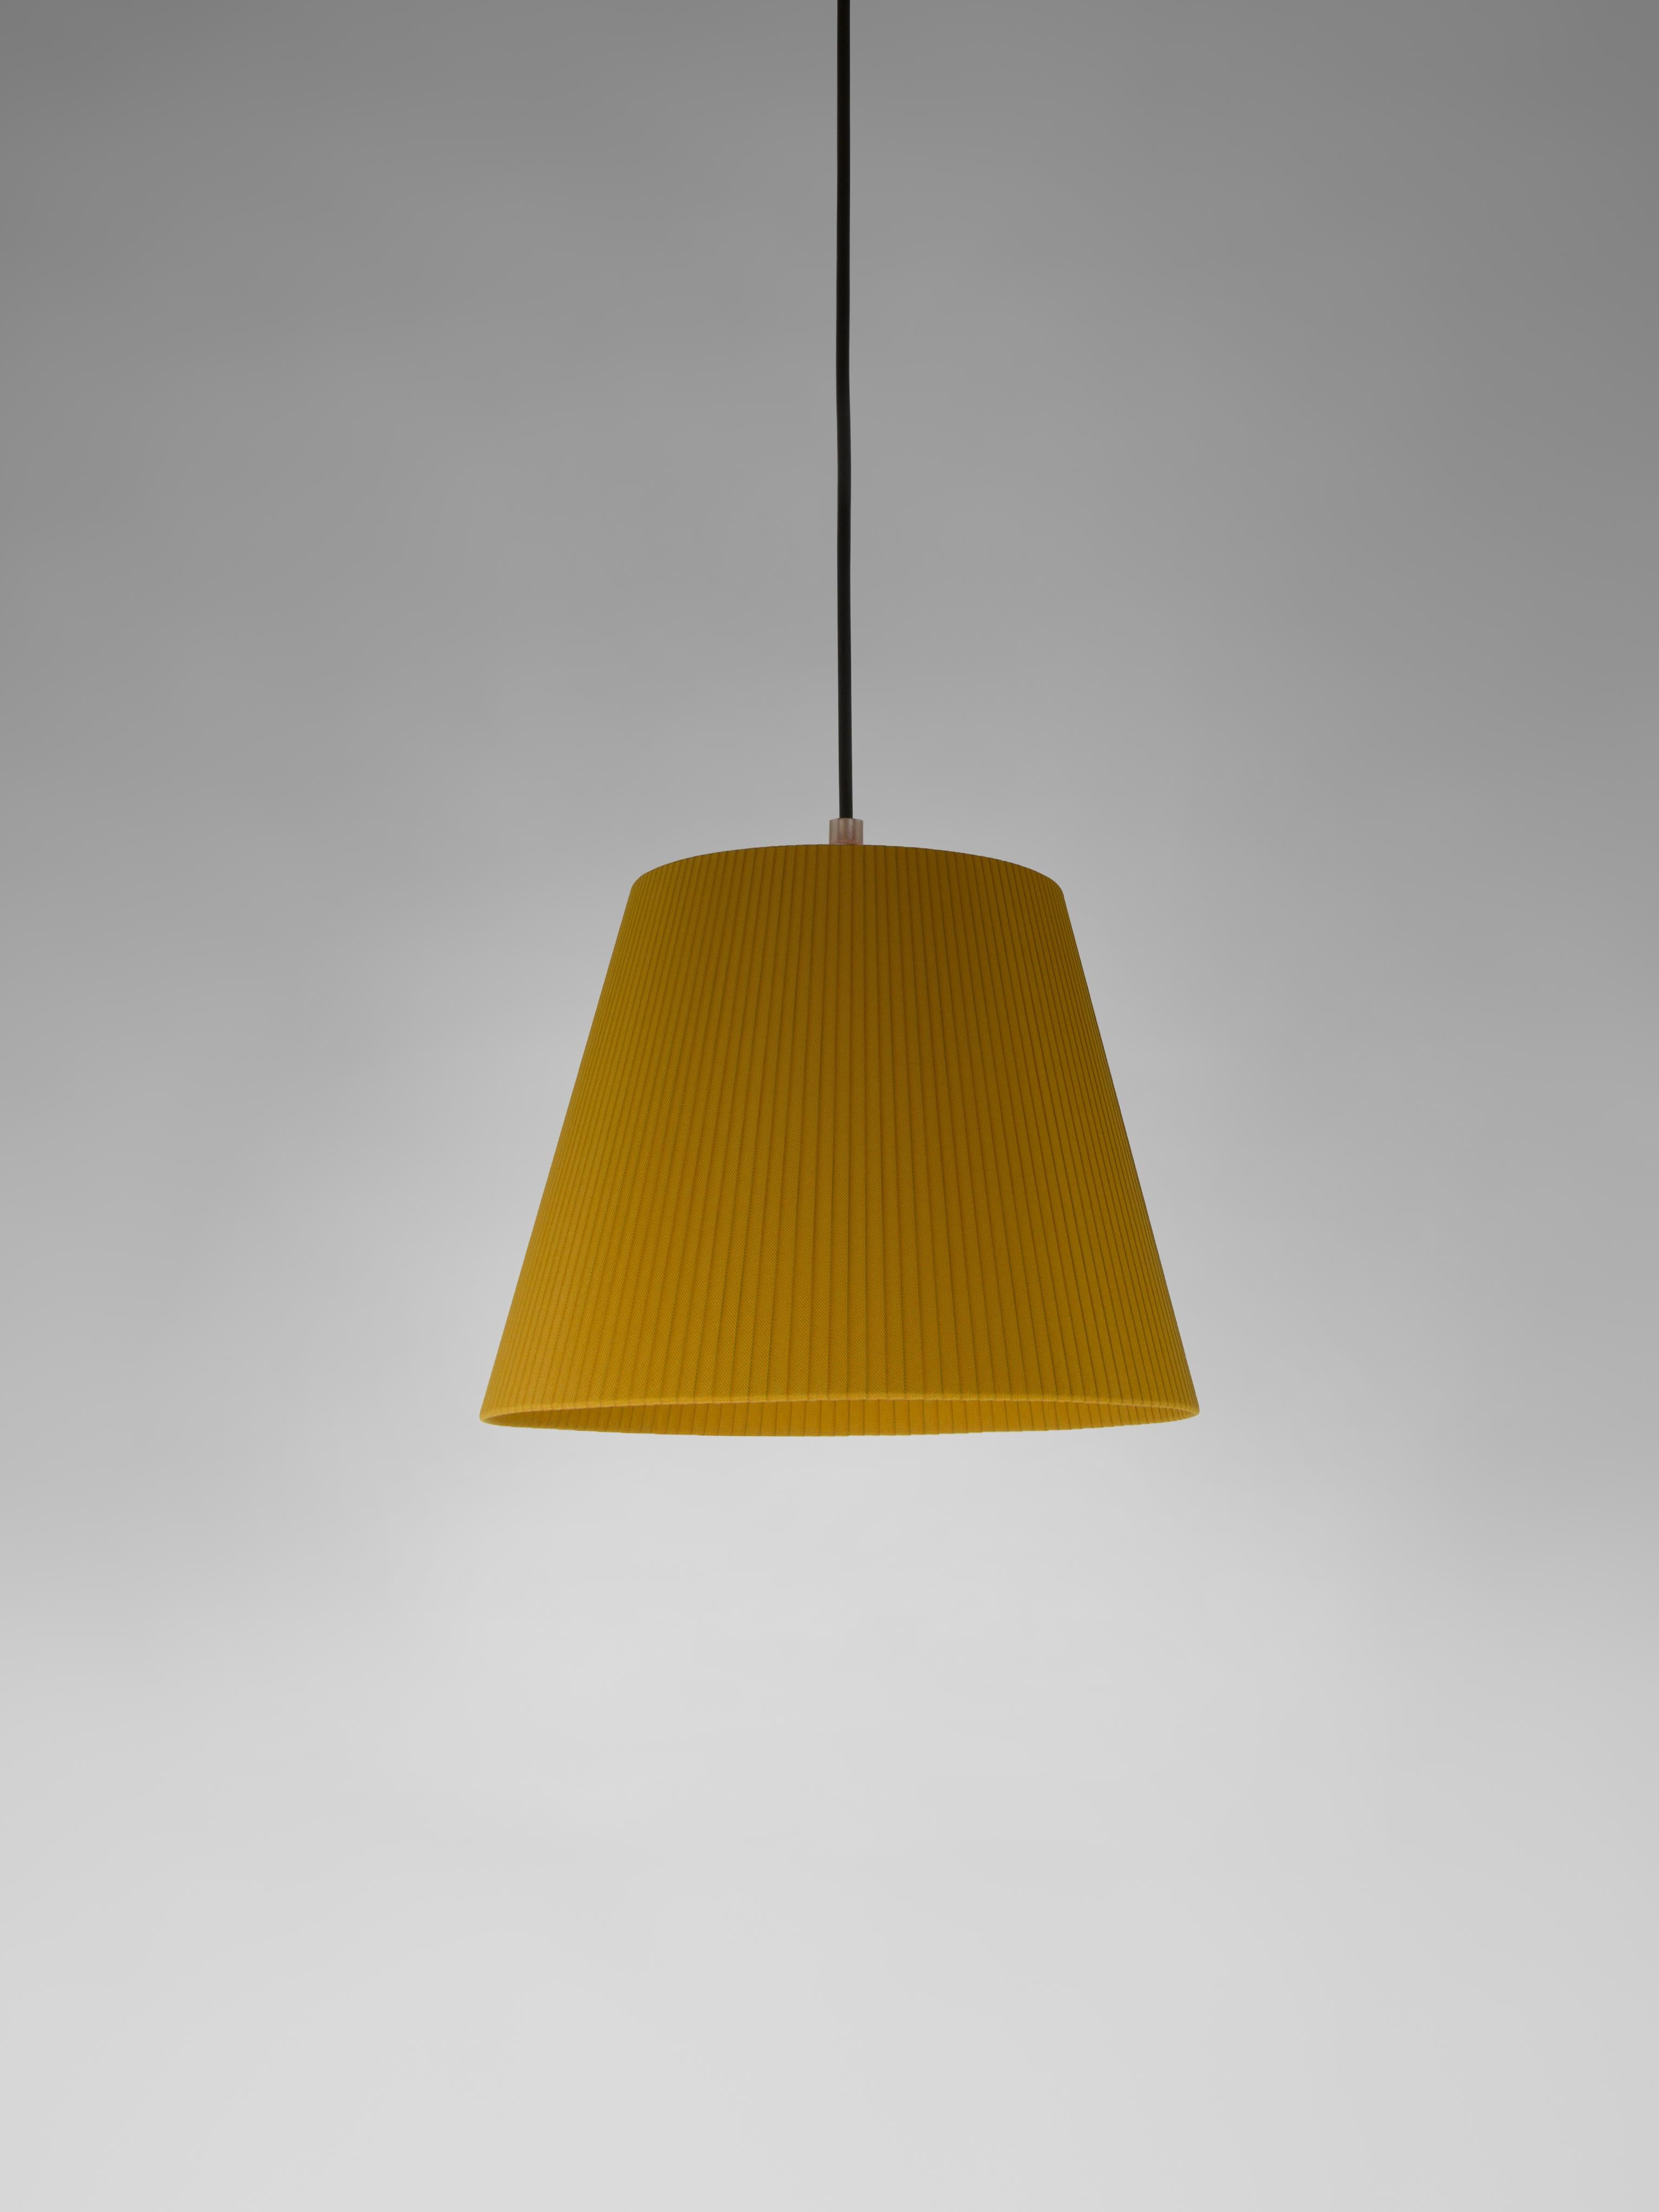 Mustard Sísísí Cónicas MT1 pendant lamp by Santa & Cole
Dimensions: D 25 x H 20 cm
Materials: Metal, ribbon.
Available in other colors.

The conical shape group has multiple finishes and sizes. It consists of four sizes: PT1, MT1, GT1 and GT3,